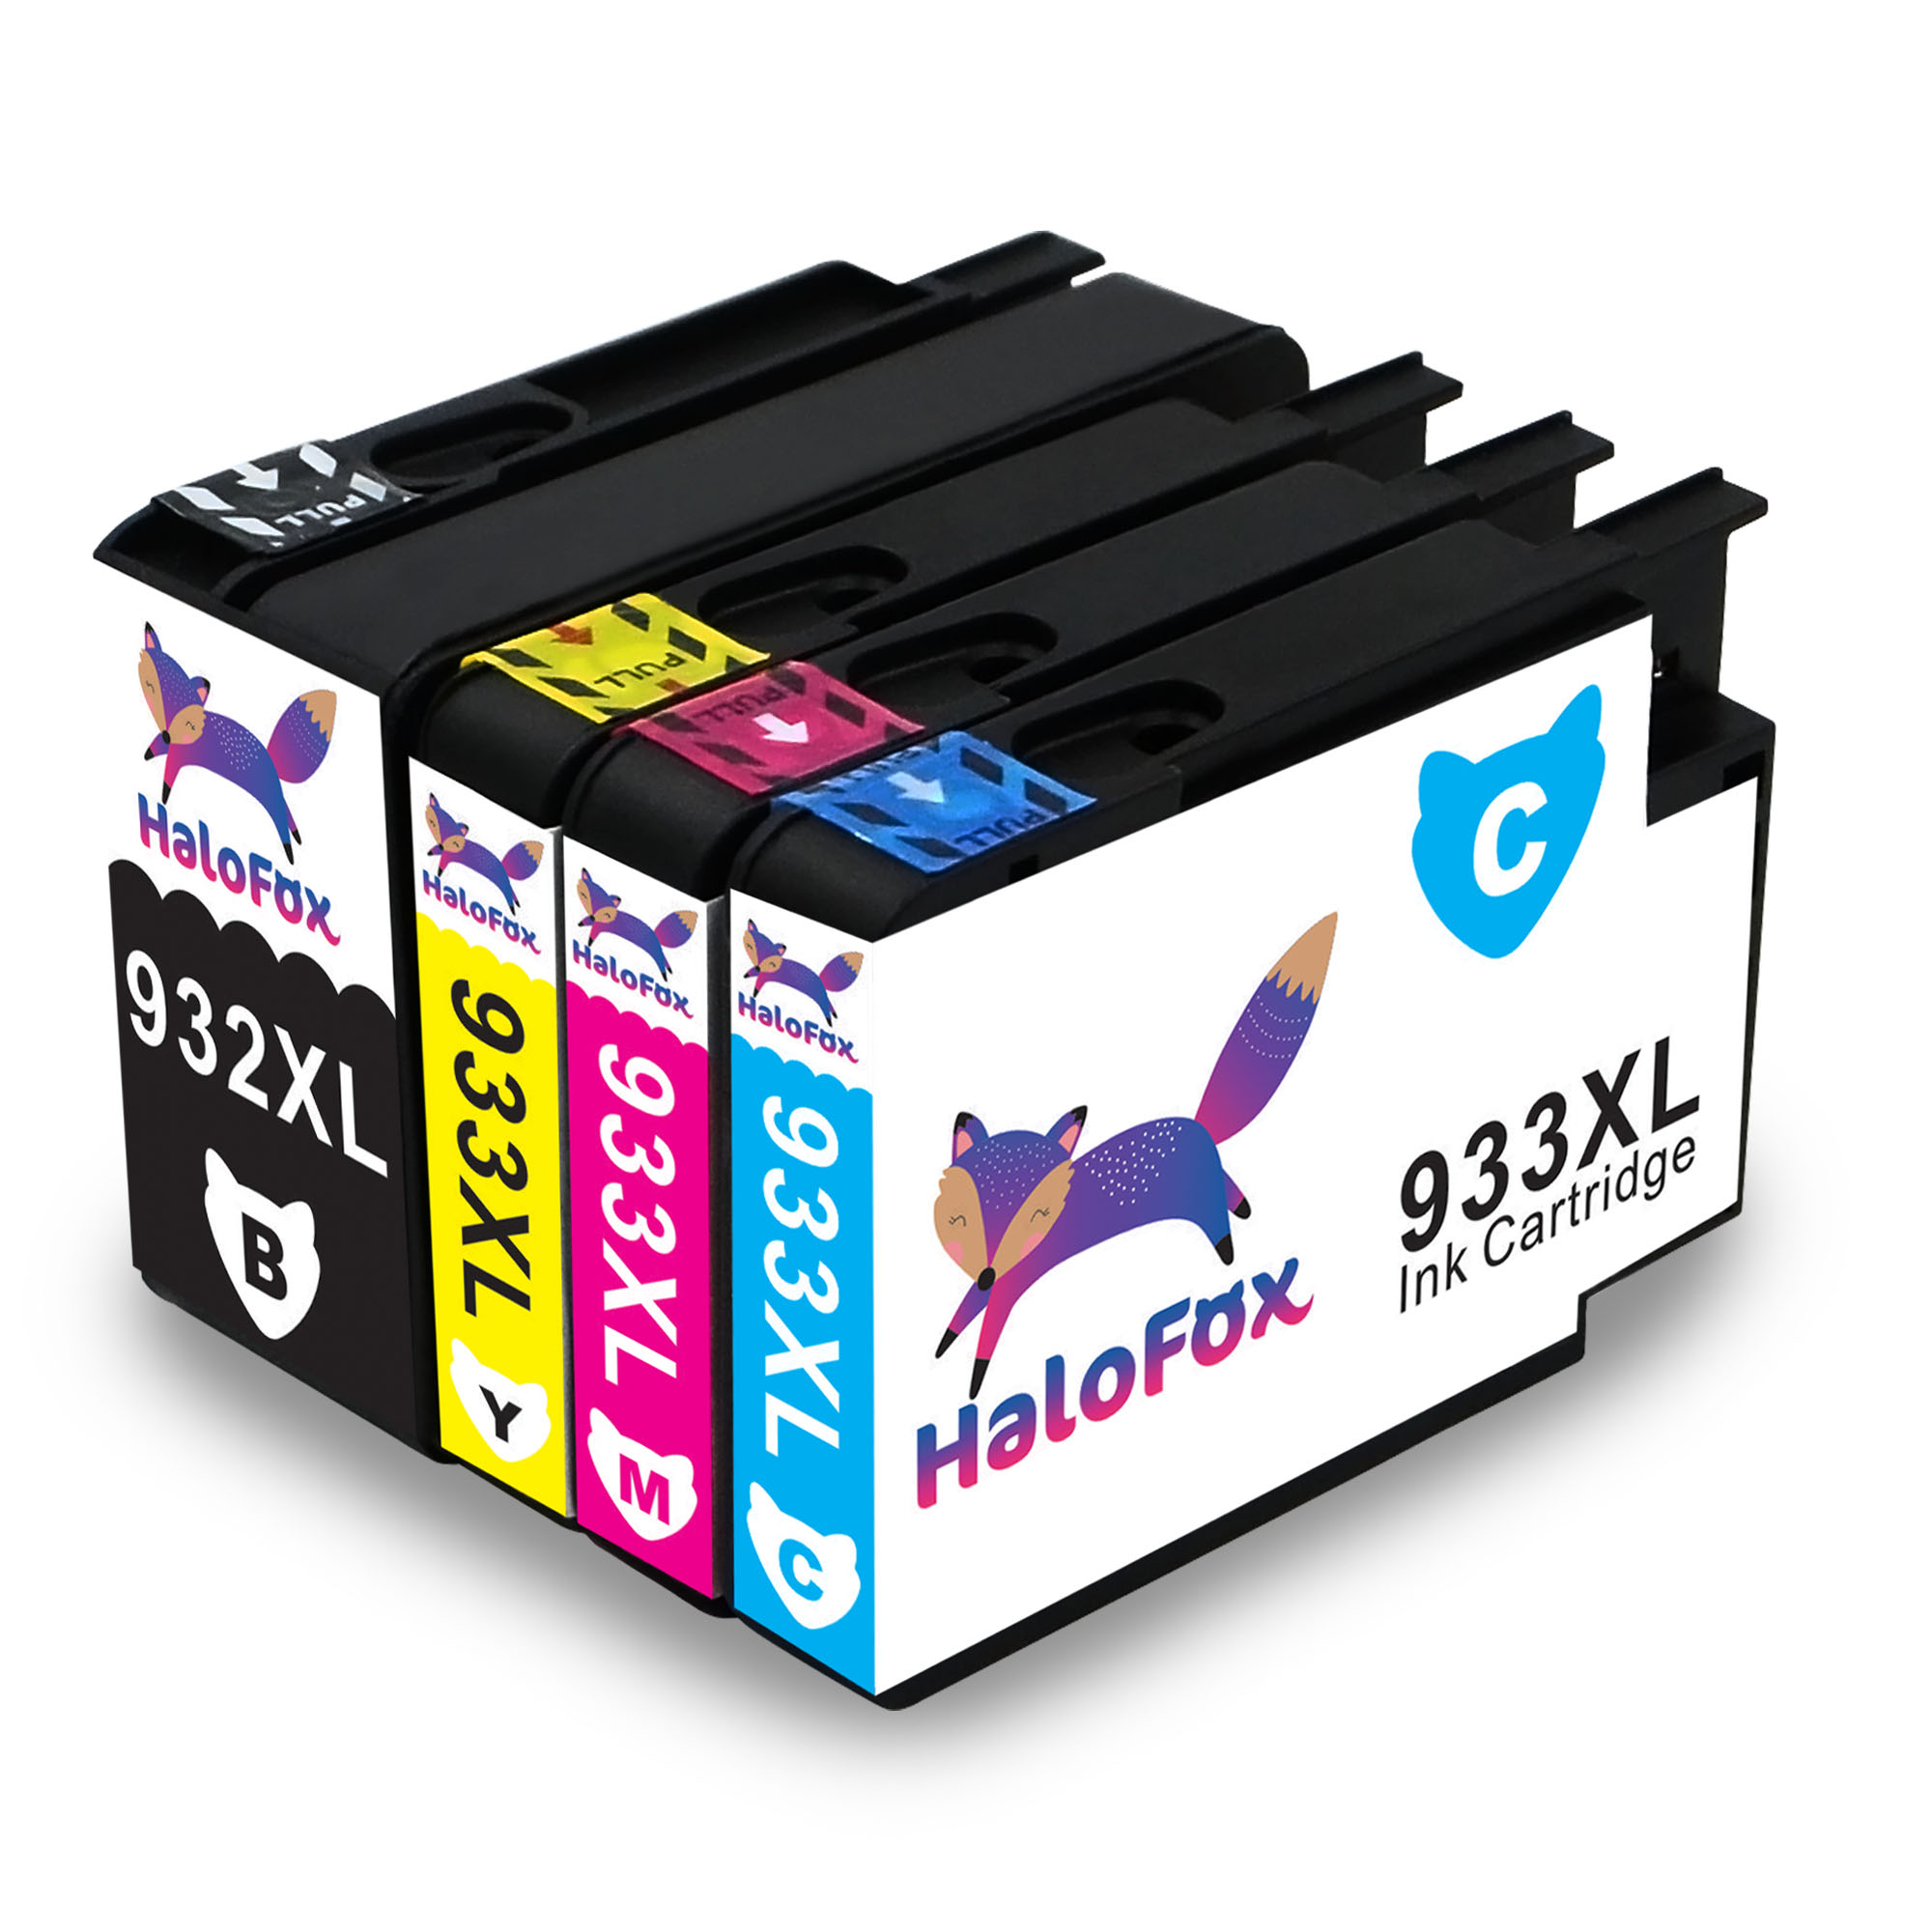 4PK Ink Cartridges Replacement 932 933 932XL 933XL for HP Officejet 6600 7612 7100 7510